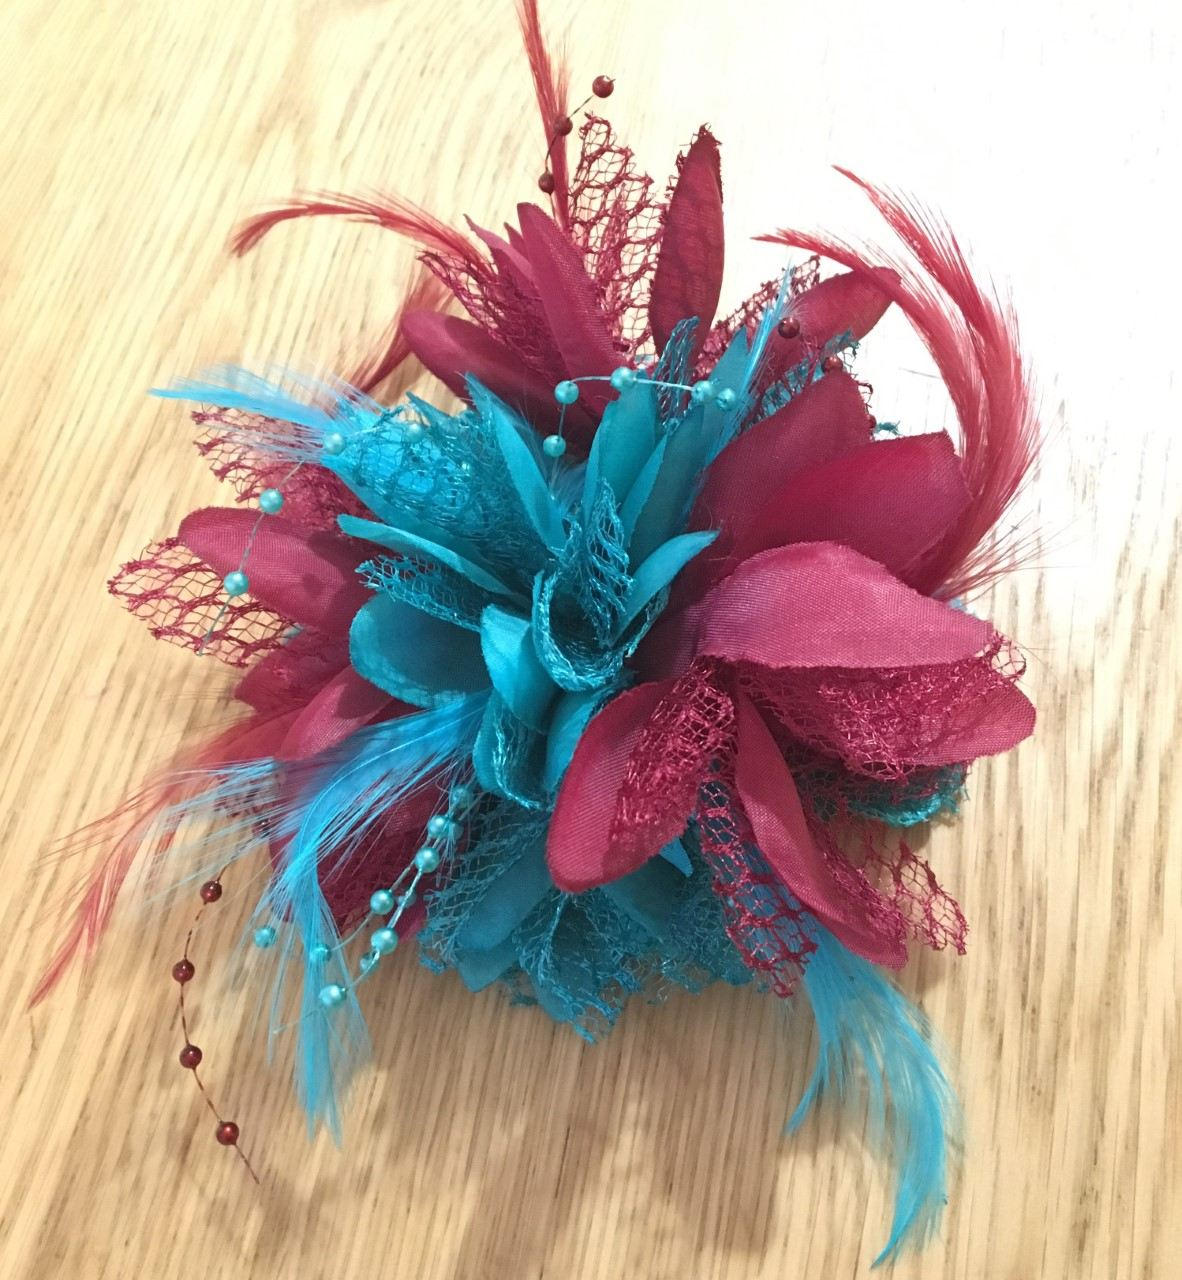 Caprilite Burgundy Wine red and Turquoise Teal Fascinator Black Headband Clip Comb Flower Corsage